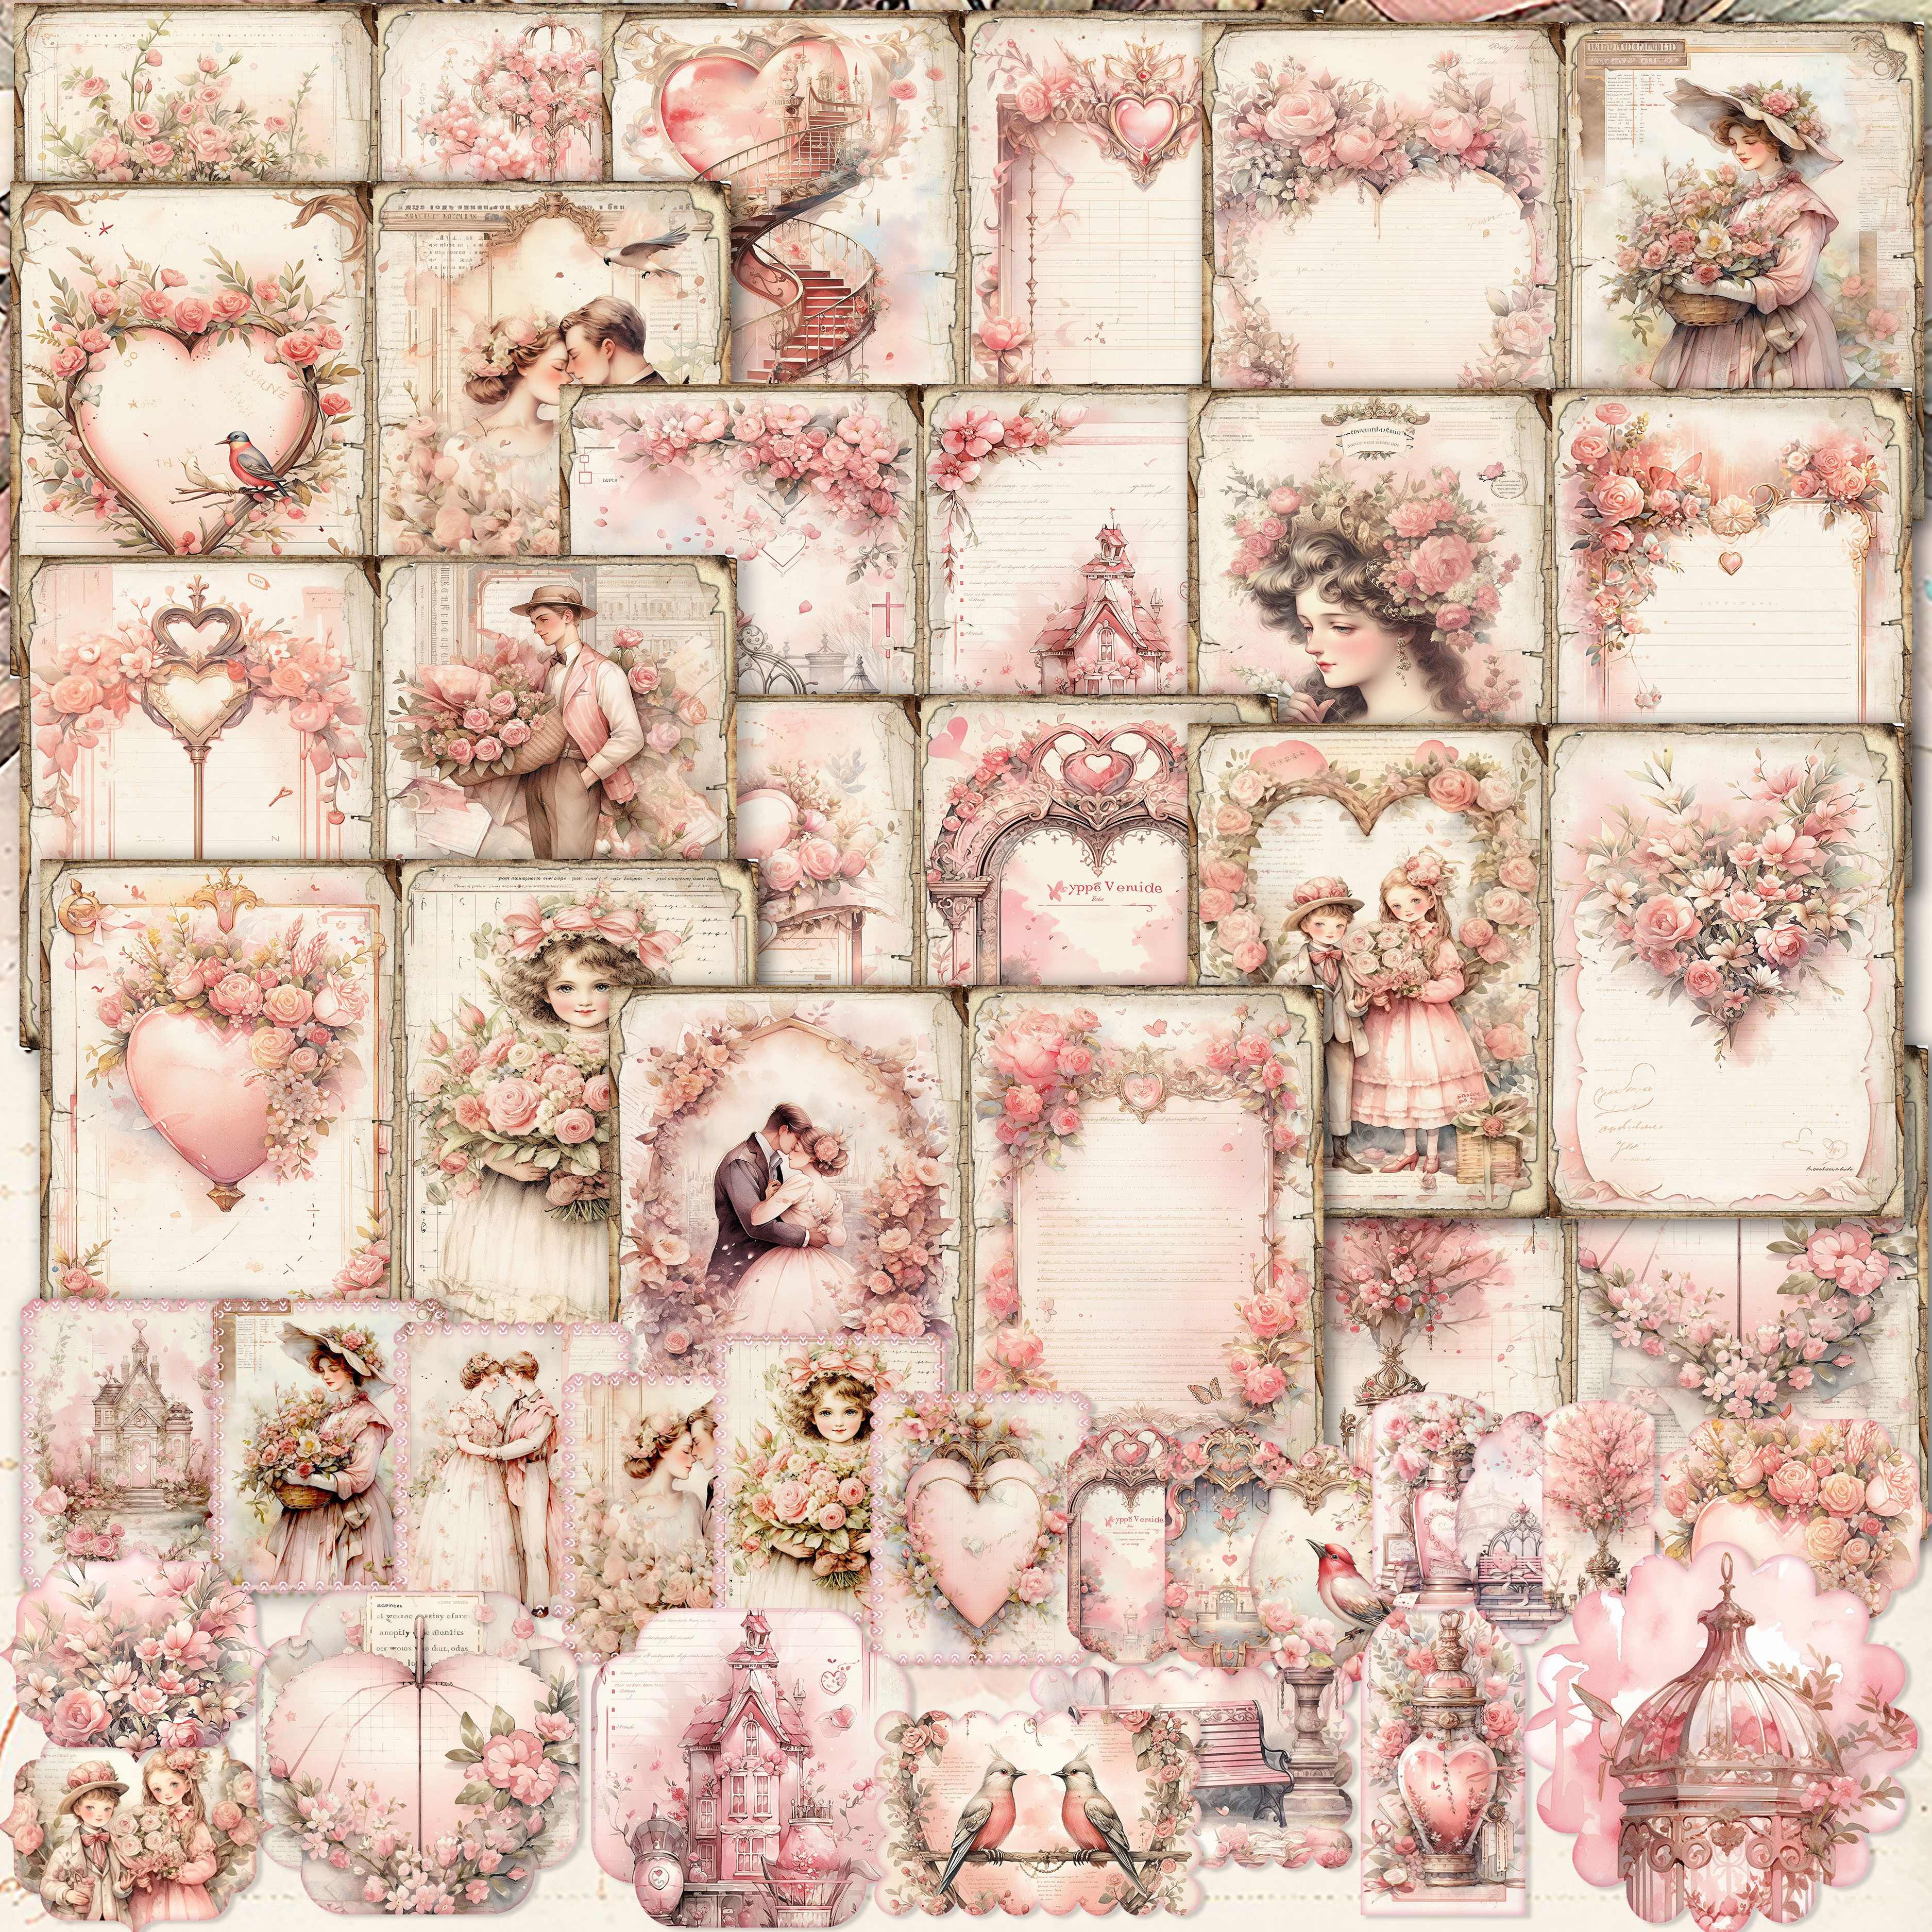 

54pcs (12paper+42stickers) Vintage Valentine's Day Theme Diy Decorative Paper Set, Perfect For Valentine Decoration, Arts Crafts, Greeting Cards, Scrapbooking Supplies, Background Paper Pad